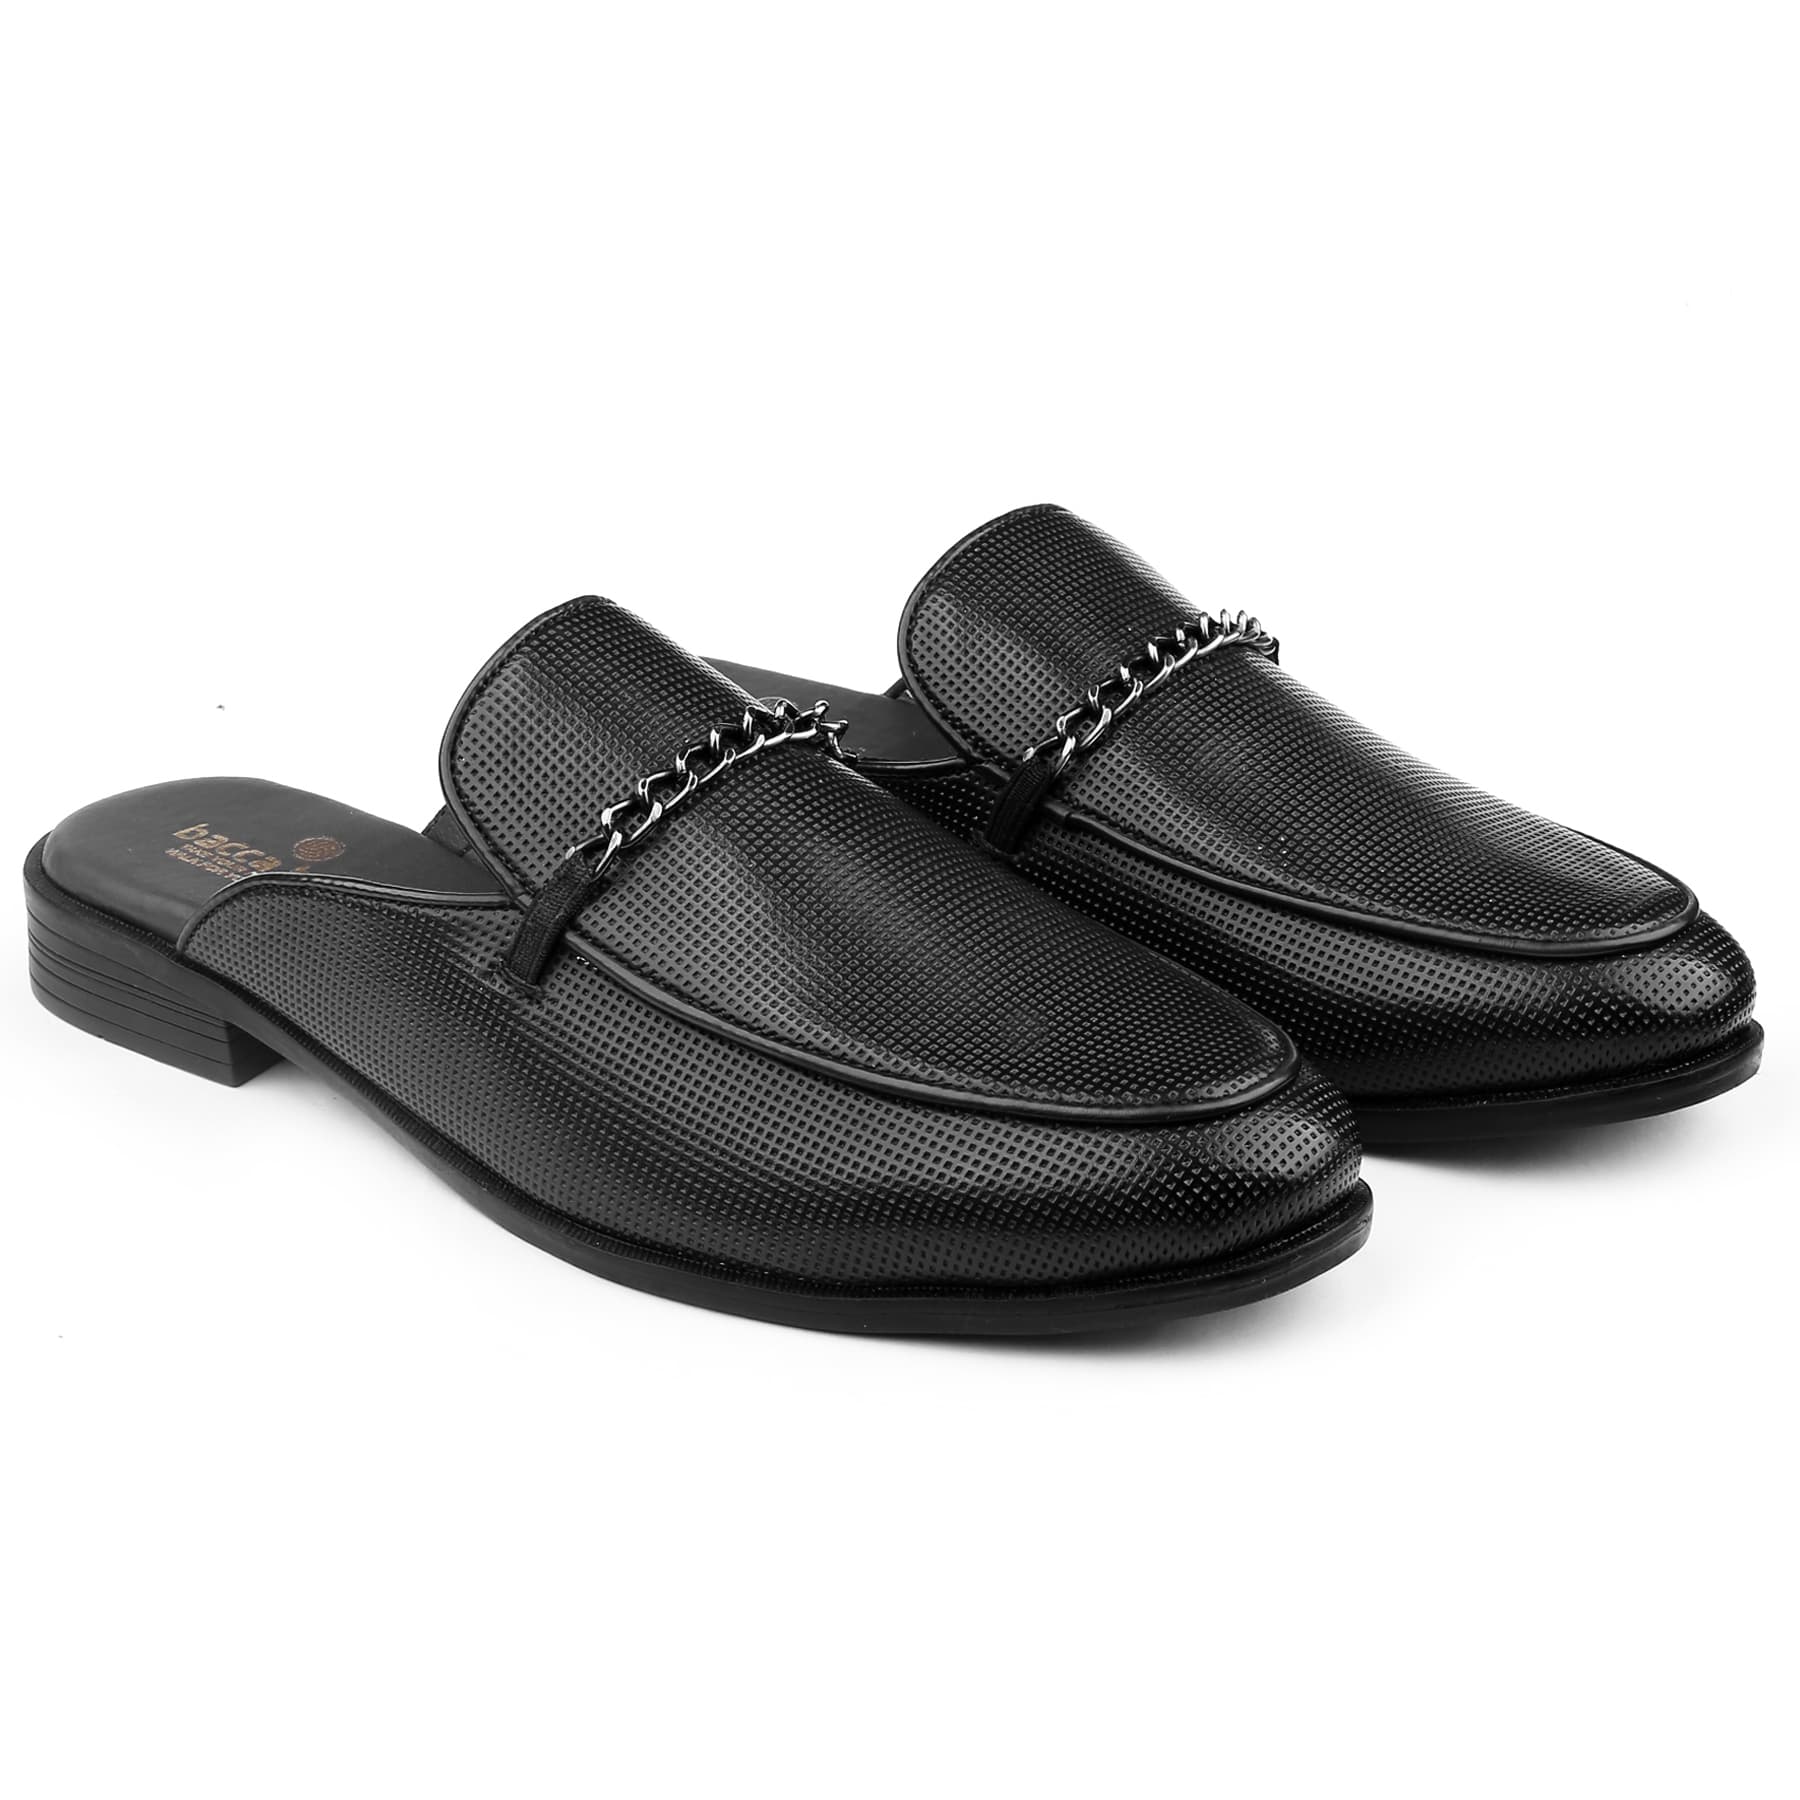 Bacca Bucci Men's MOROCCO Mules Clogs Open back Loafers with Comfortable Memory Insoles | Party Ethnic Wear Shoes